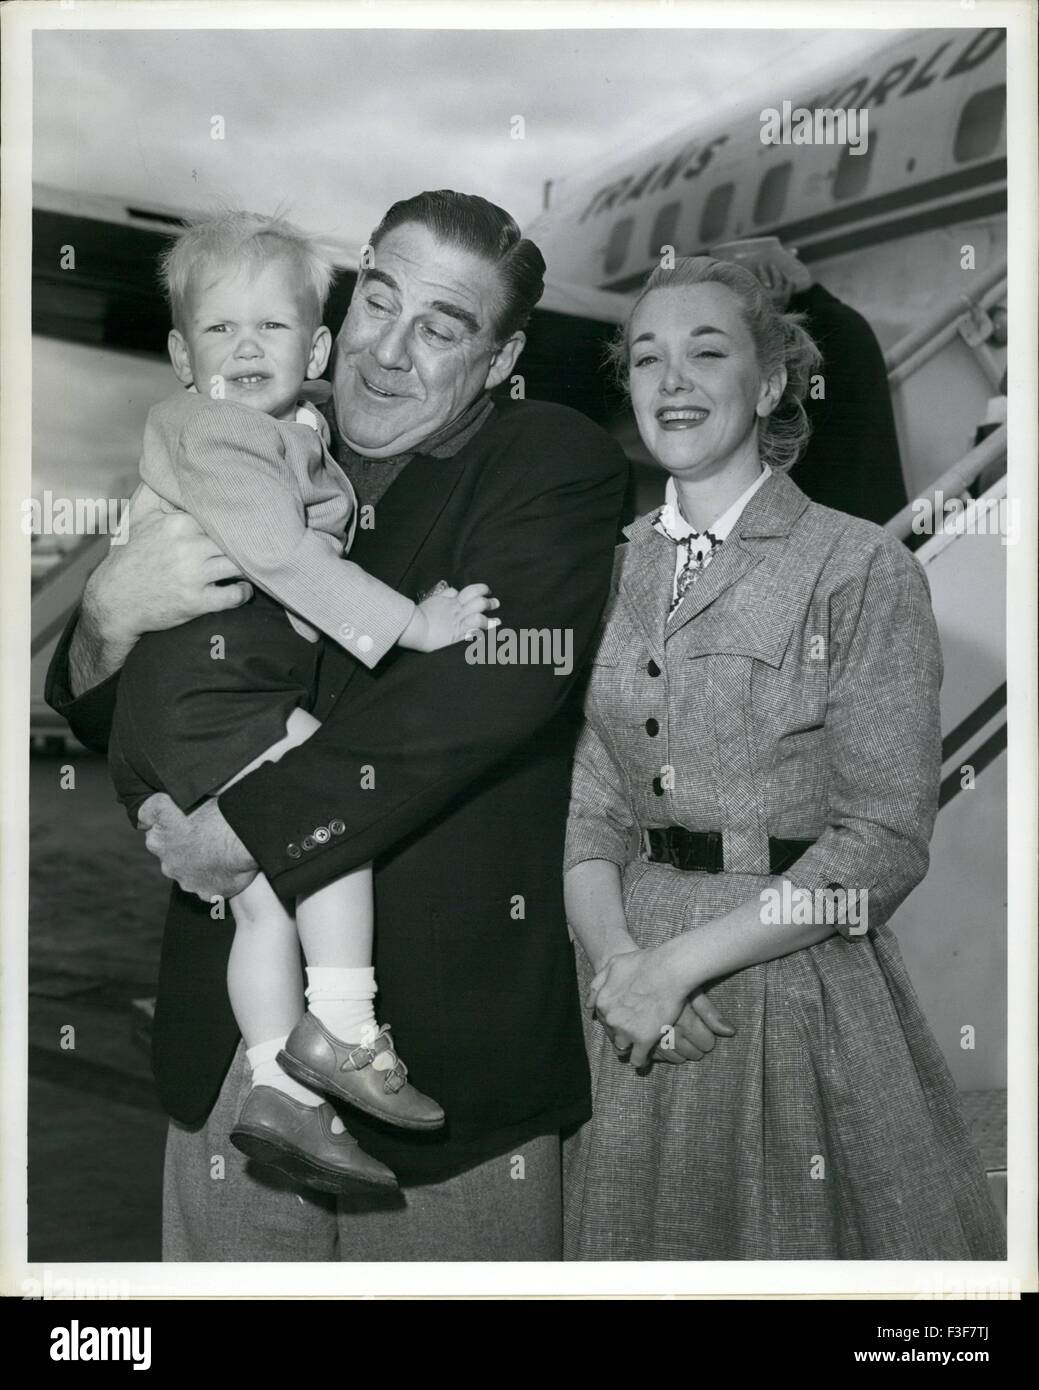 Feb. 24, 1962 - Idlewild Airport, N.Y., May 21 -- Actor Paul Douglas meets his wife and son, Adams, after their arrival here this morning via TWA Ambassador flight from Los Angeles. Mrs. Douglas is actress Jan Sterling. © Keystone Pictures USA/ZUMAPRESS.com/Alamy Live News Stock Photo